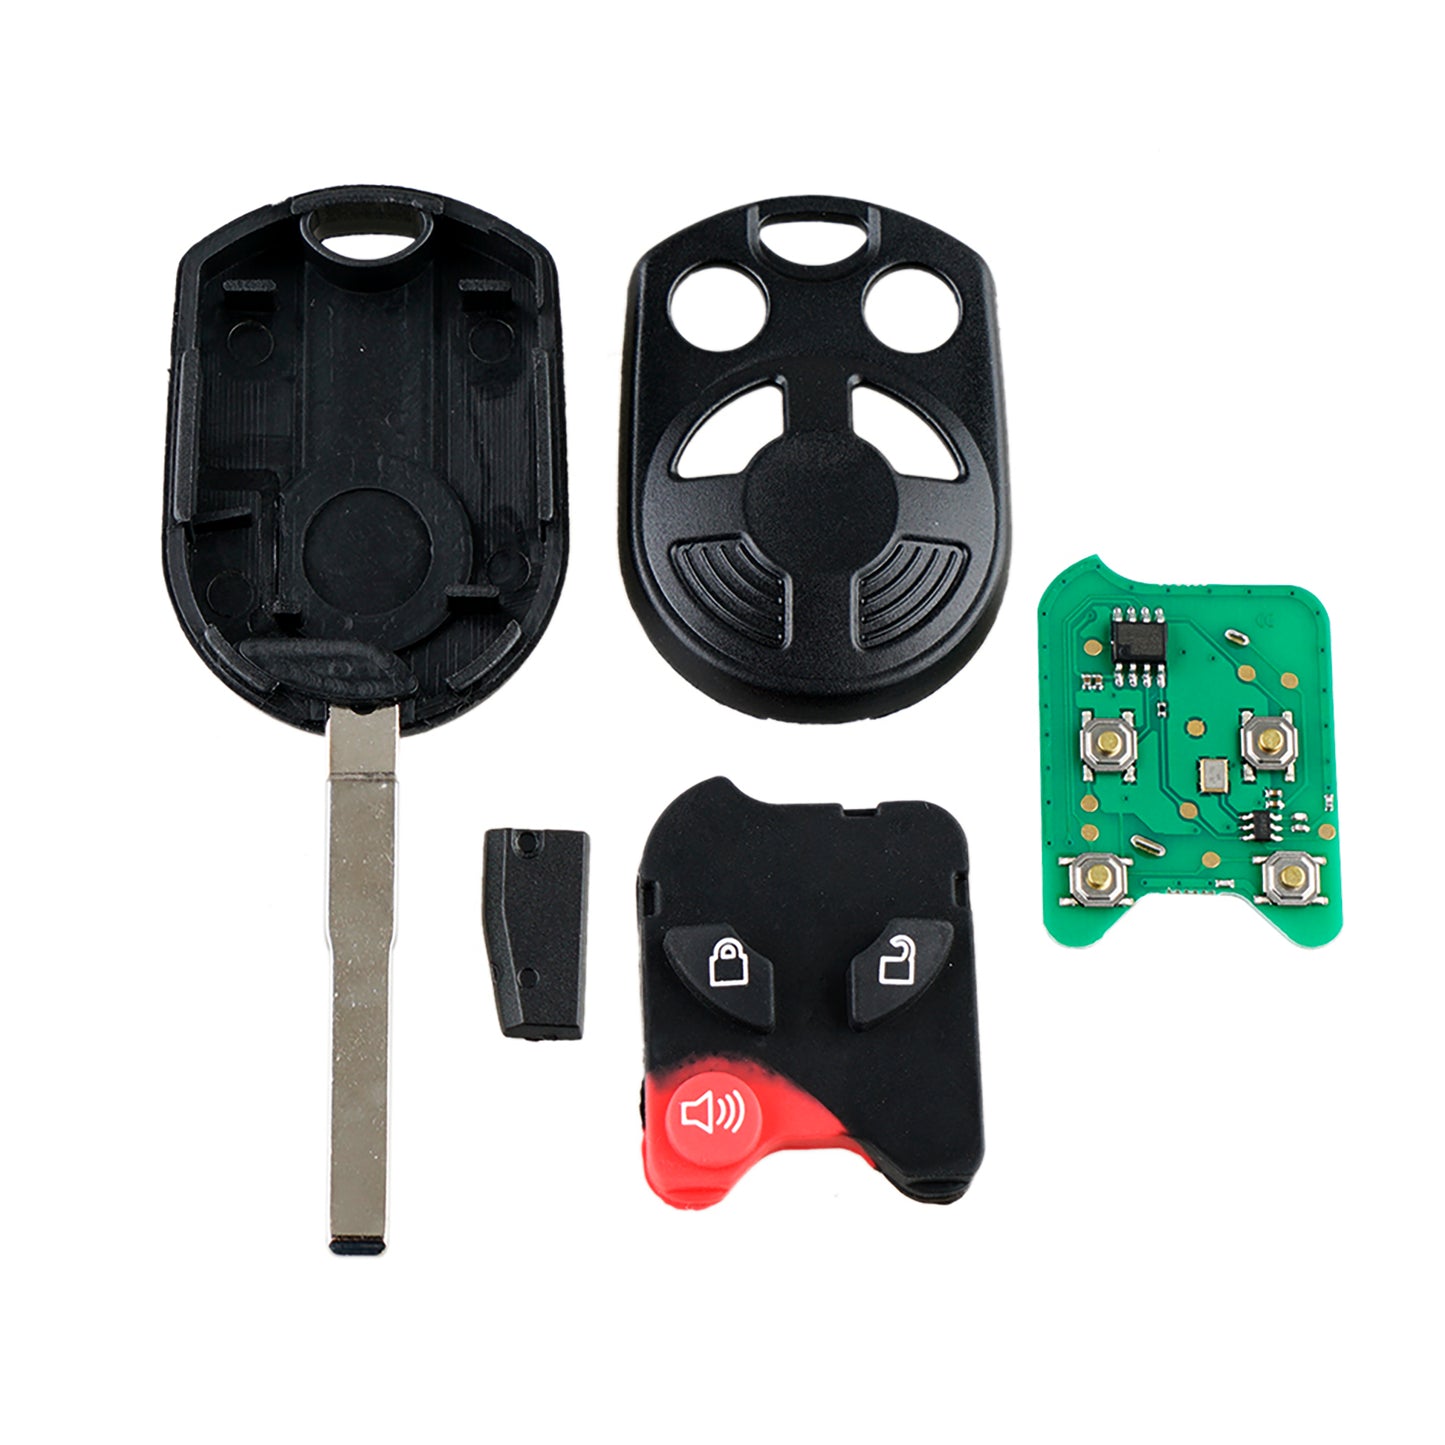 3 Buttons 315MHz Keyless Entry Fob Remote Car Key For 2012-2019 Ford Focus C-Max Escape Transit Connect F350 Fiesta FCC ID:  OUCD6000022 SKU : J746